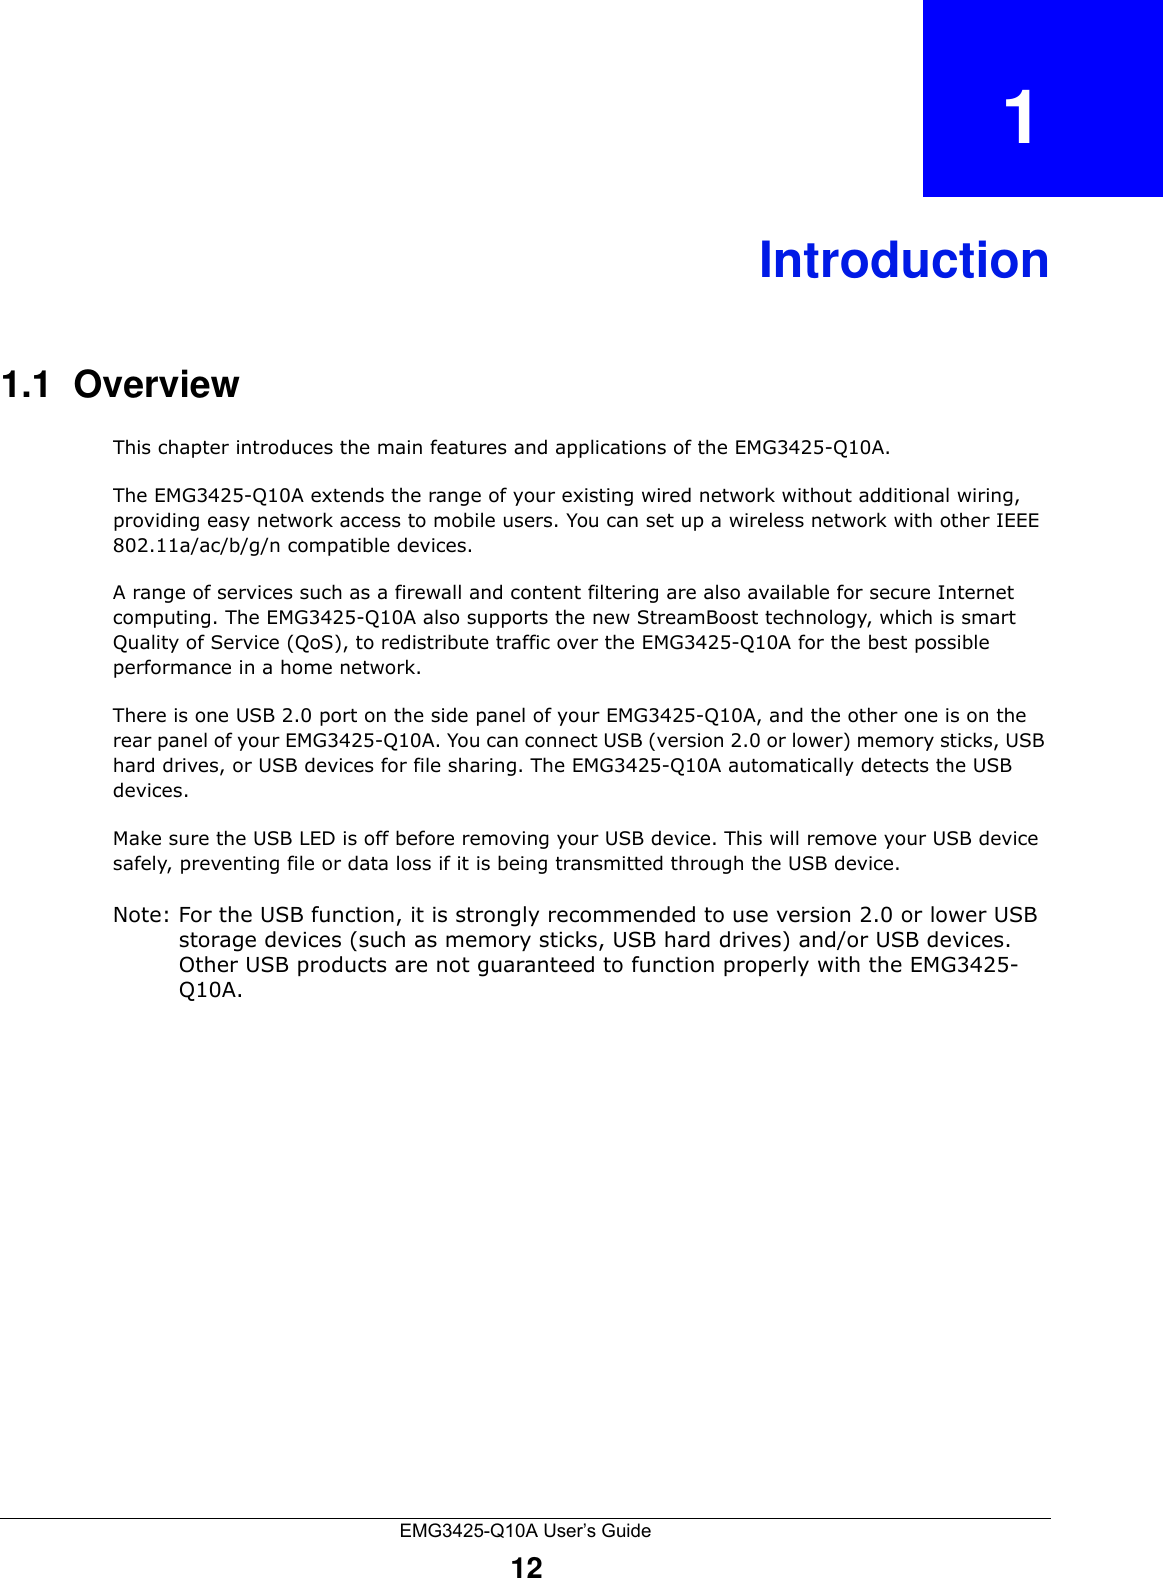 EMG3425-Q10A User’s Guide12CHAPTER   1Introduction1.1  OverviewThis chapter introduces the main features and applications of the EMG3425-Q10A.The EMG3425-Q10A extends the range of your existing wired network without additional wiring, providing easy network access to mobile users. You can set up a wireless network with other IEEE 802.11a/ac/b/g/n compatible devices. A range of services such as a firewall and content filtering are also available for secure Internet computing. The EMG3425-Q10A also supports the new StreamBoost technology, which is smart Quality of Service (QoS), to redistribute traffic over the EMG3425-Q10A for the best possible performance in a home network. There is one USB 2.0 port on the side panel of your EMG3425-Q10A, and the other one is on the rear panel of your EMG3425-Q10A. You can connect USB (version 2.0 or lower) memory sticks, USB hard drives, or USB devices for file sharing. The EMG3425-Q10A automatically detects the USB devices. Make sure the USB LED is off before removing your USB device. This will remove your USB device safely, preventing file or data loss if it is being transmitted through the USB device.Note: For the USB function, it is strongly recommended to use version 2.0 or lower USB storage devices (such as memory sticks, USB hard drives) and/or USB devices. Other USB products are not guaranteed to function properly with the EMG3425-Q10A.